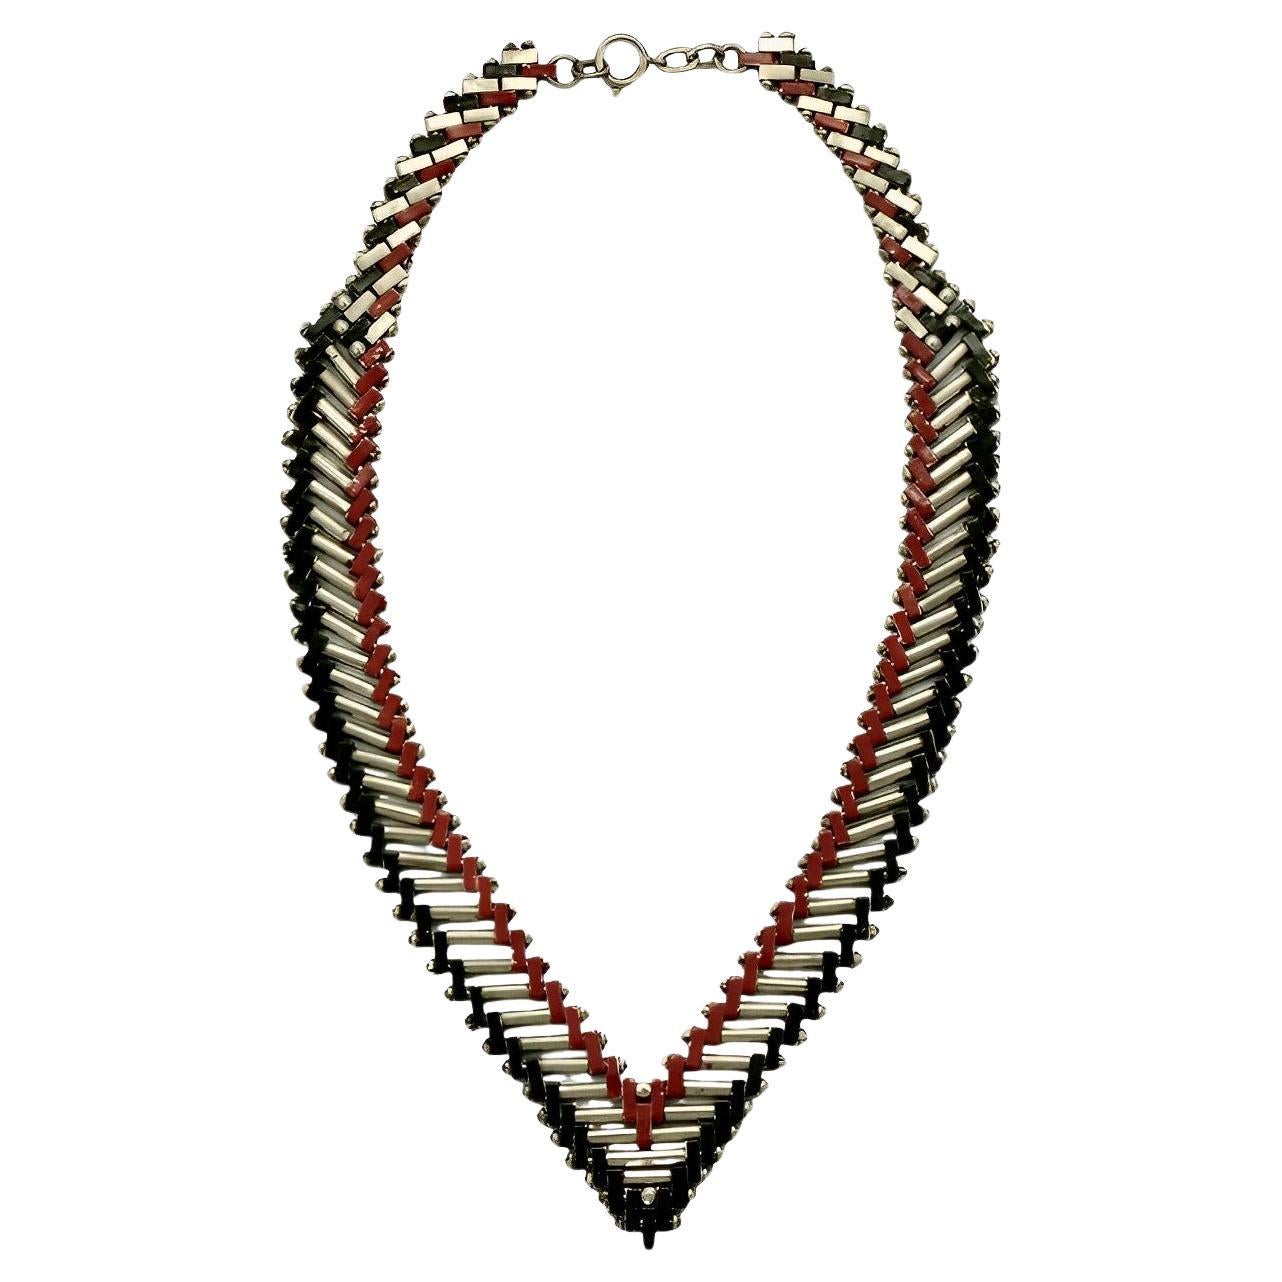 Jakob Bengel Art Deco Chrome Red and Black Enamel Necklace circa 1930s For Sale